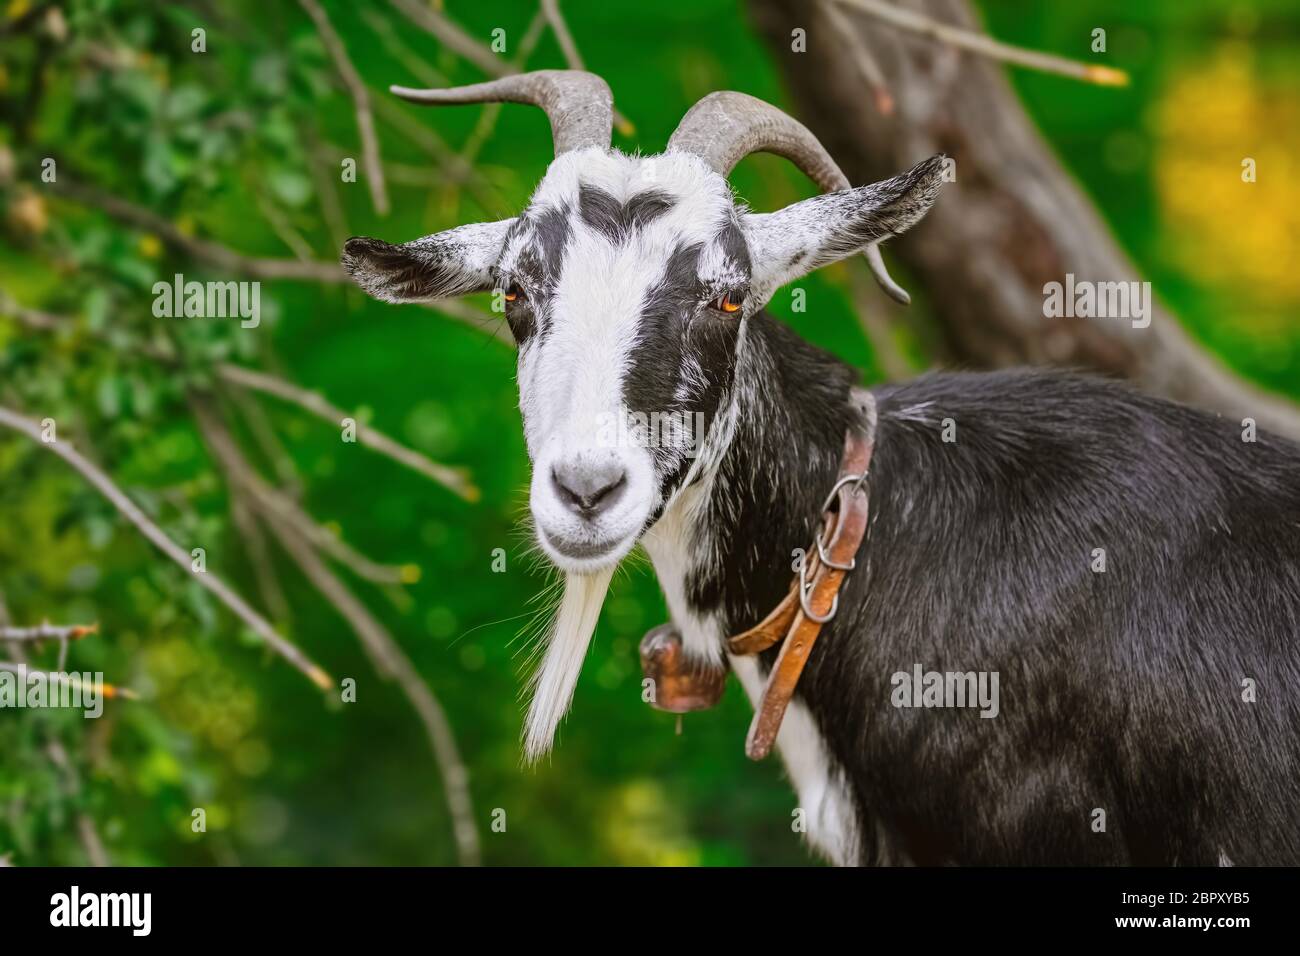 Portrait of the billy goat with horns Stock Photo